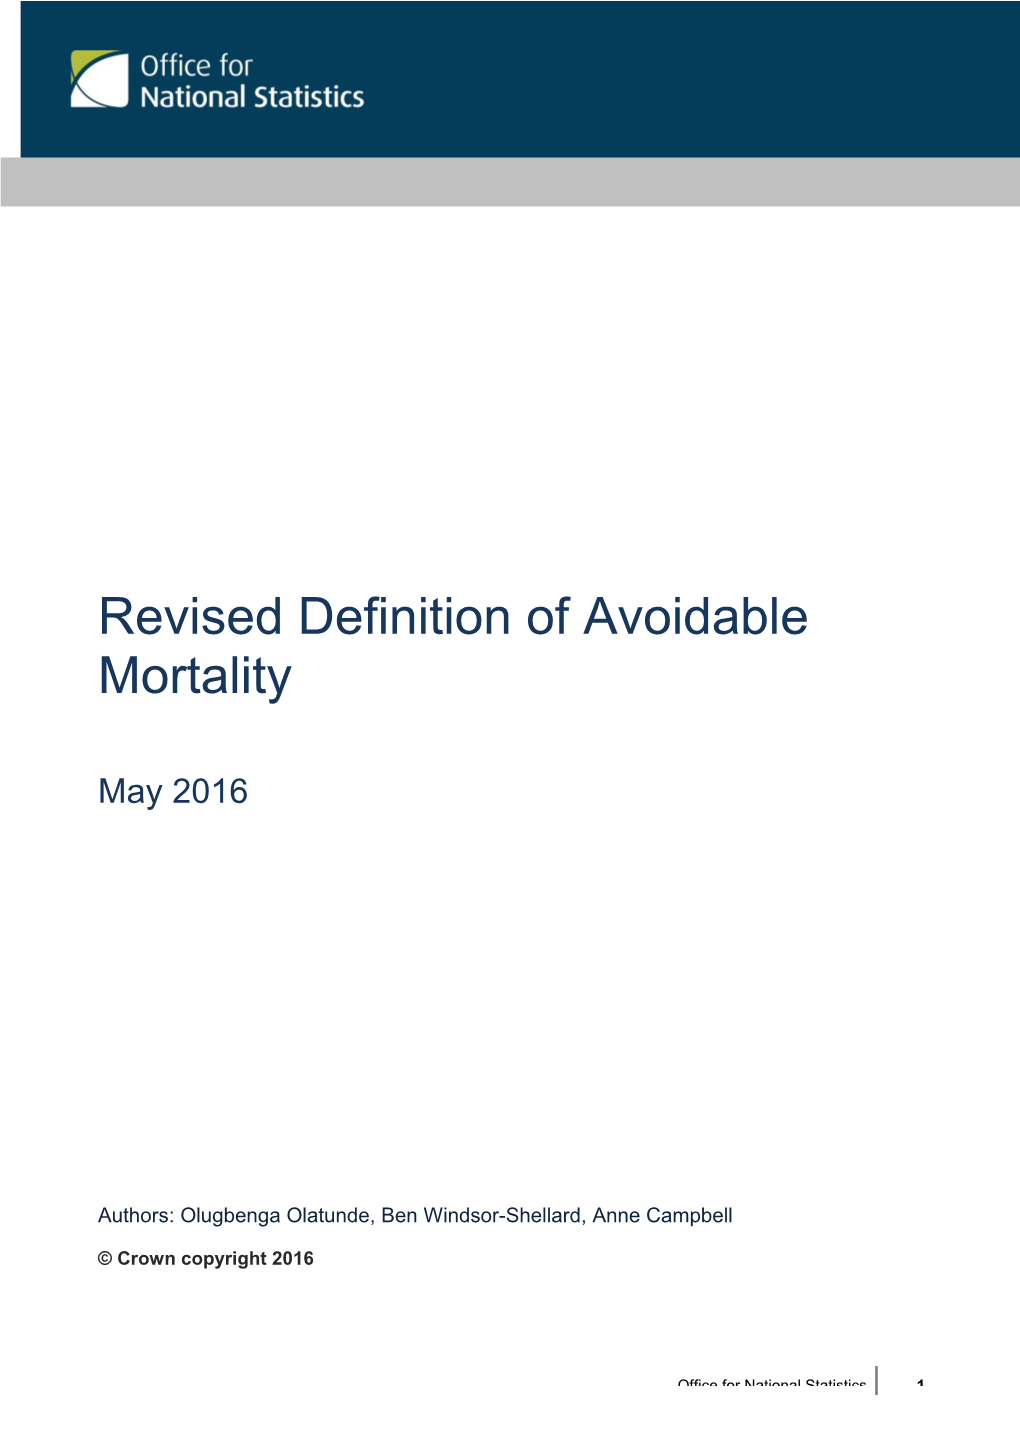 Revised Definition of Avoidable Mortality